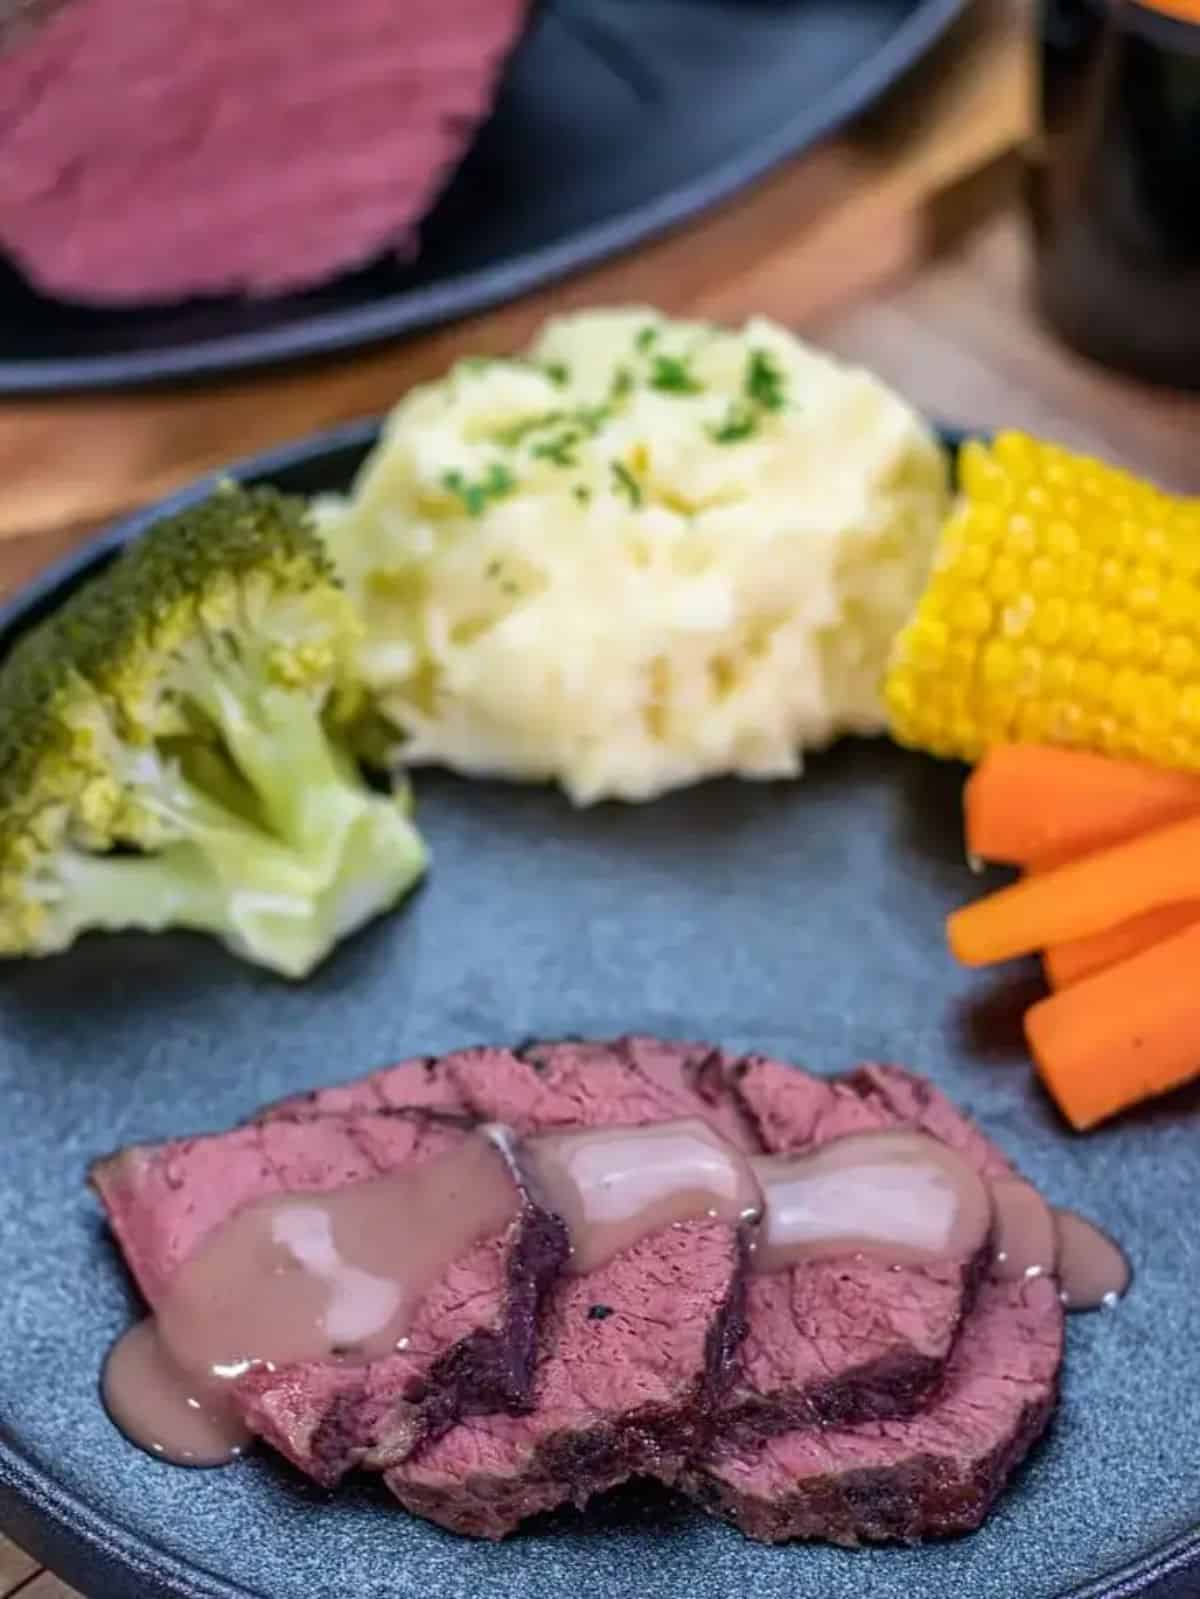 Delicious corned beef in red wine with mashed potatoes and veggies on a gray plate.